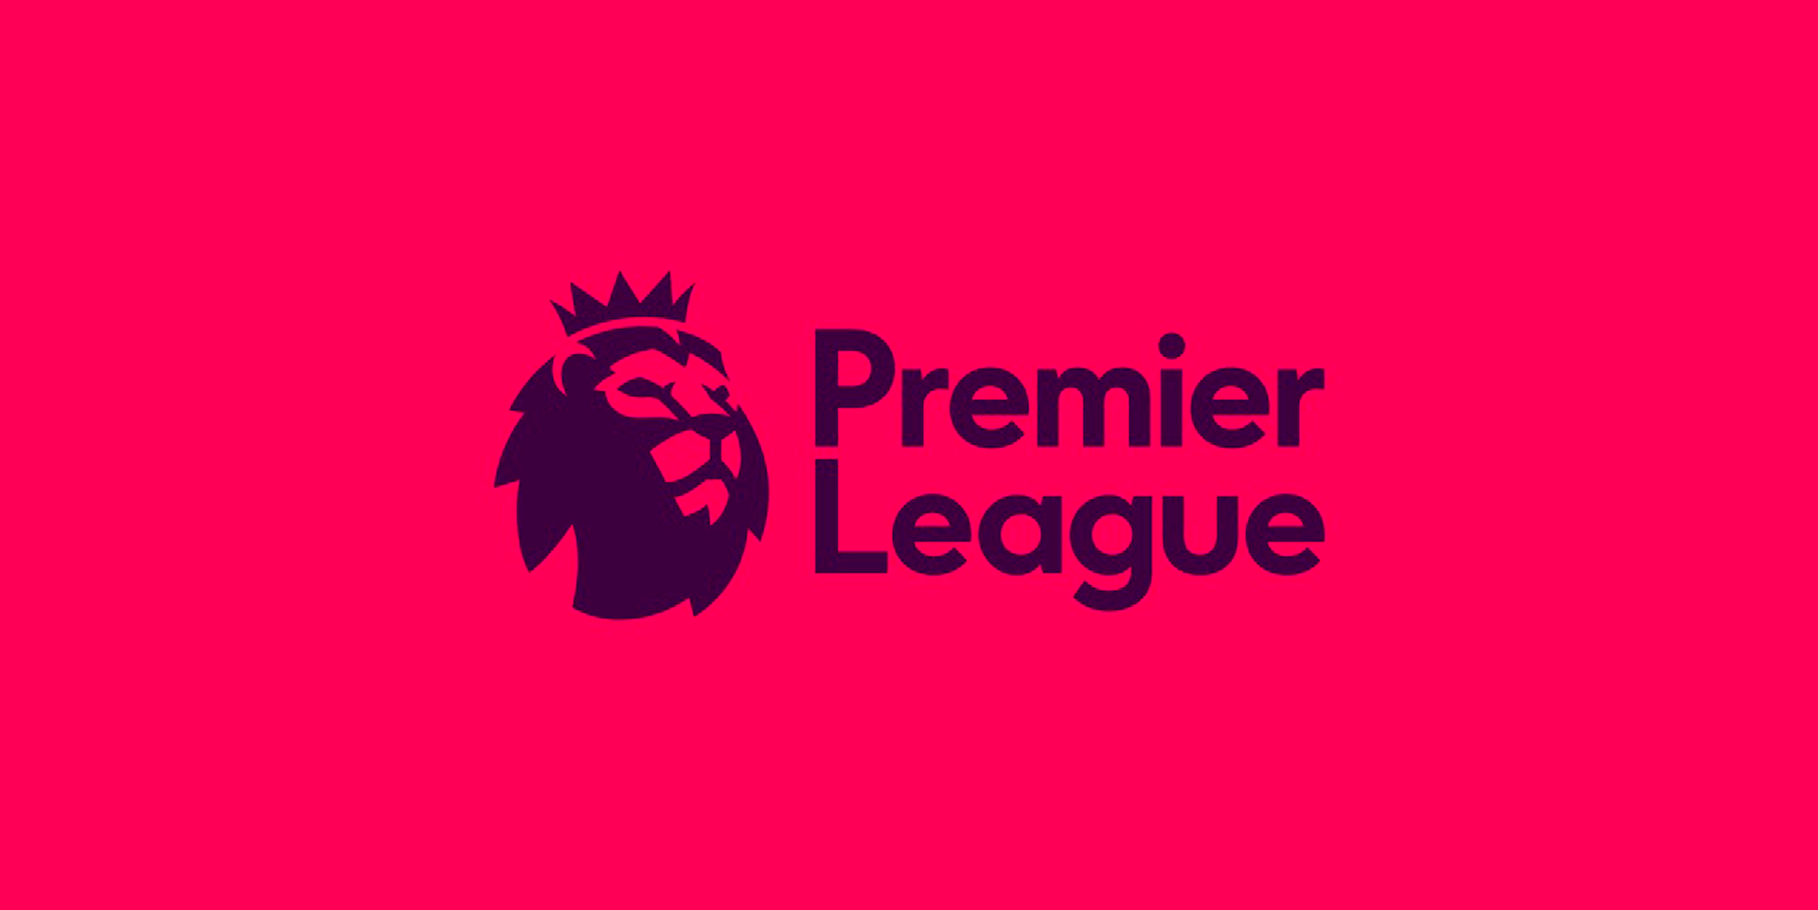 Premier League a brand identity that works hard, plays hard Monotype.